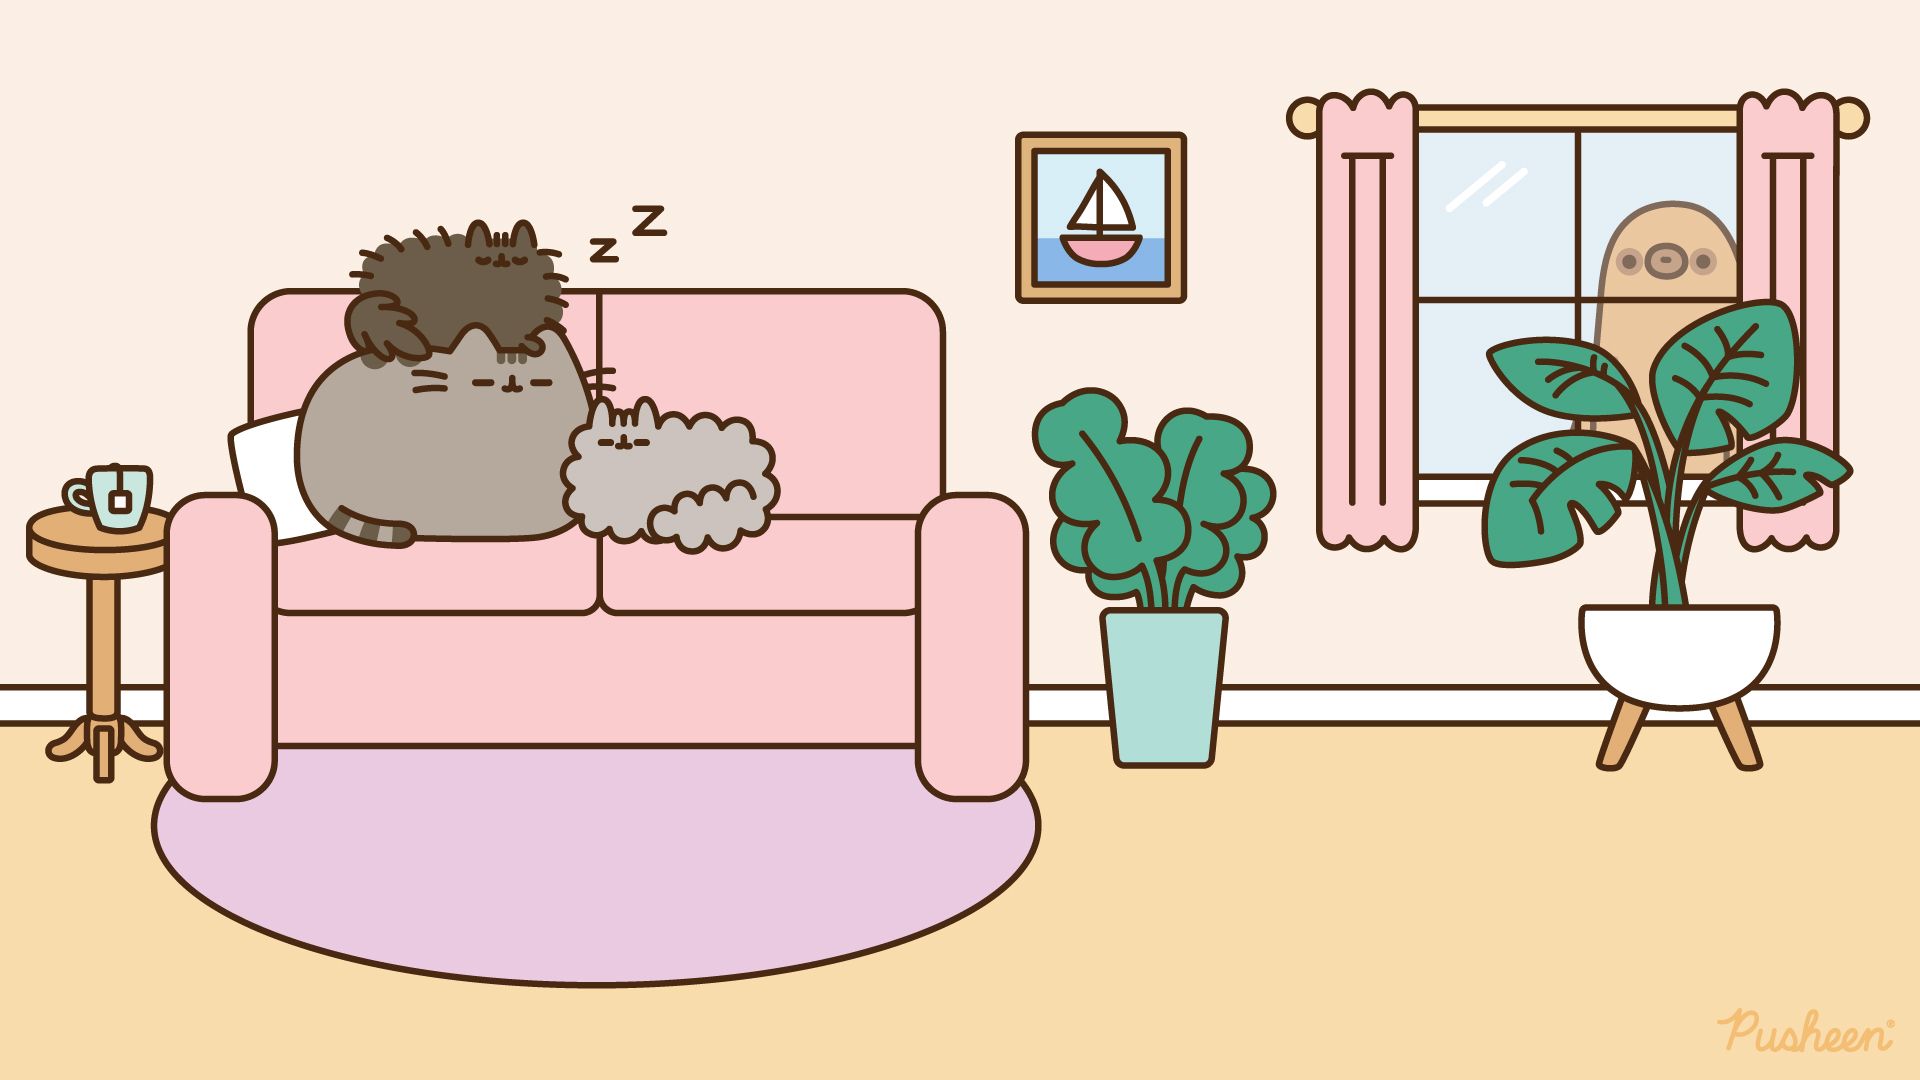 A cat sitting on the couch in front of an open window - Pusheen